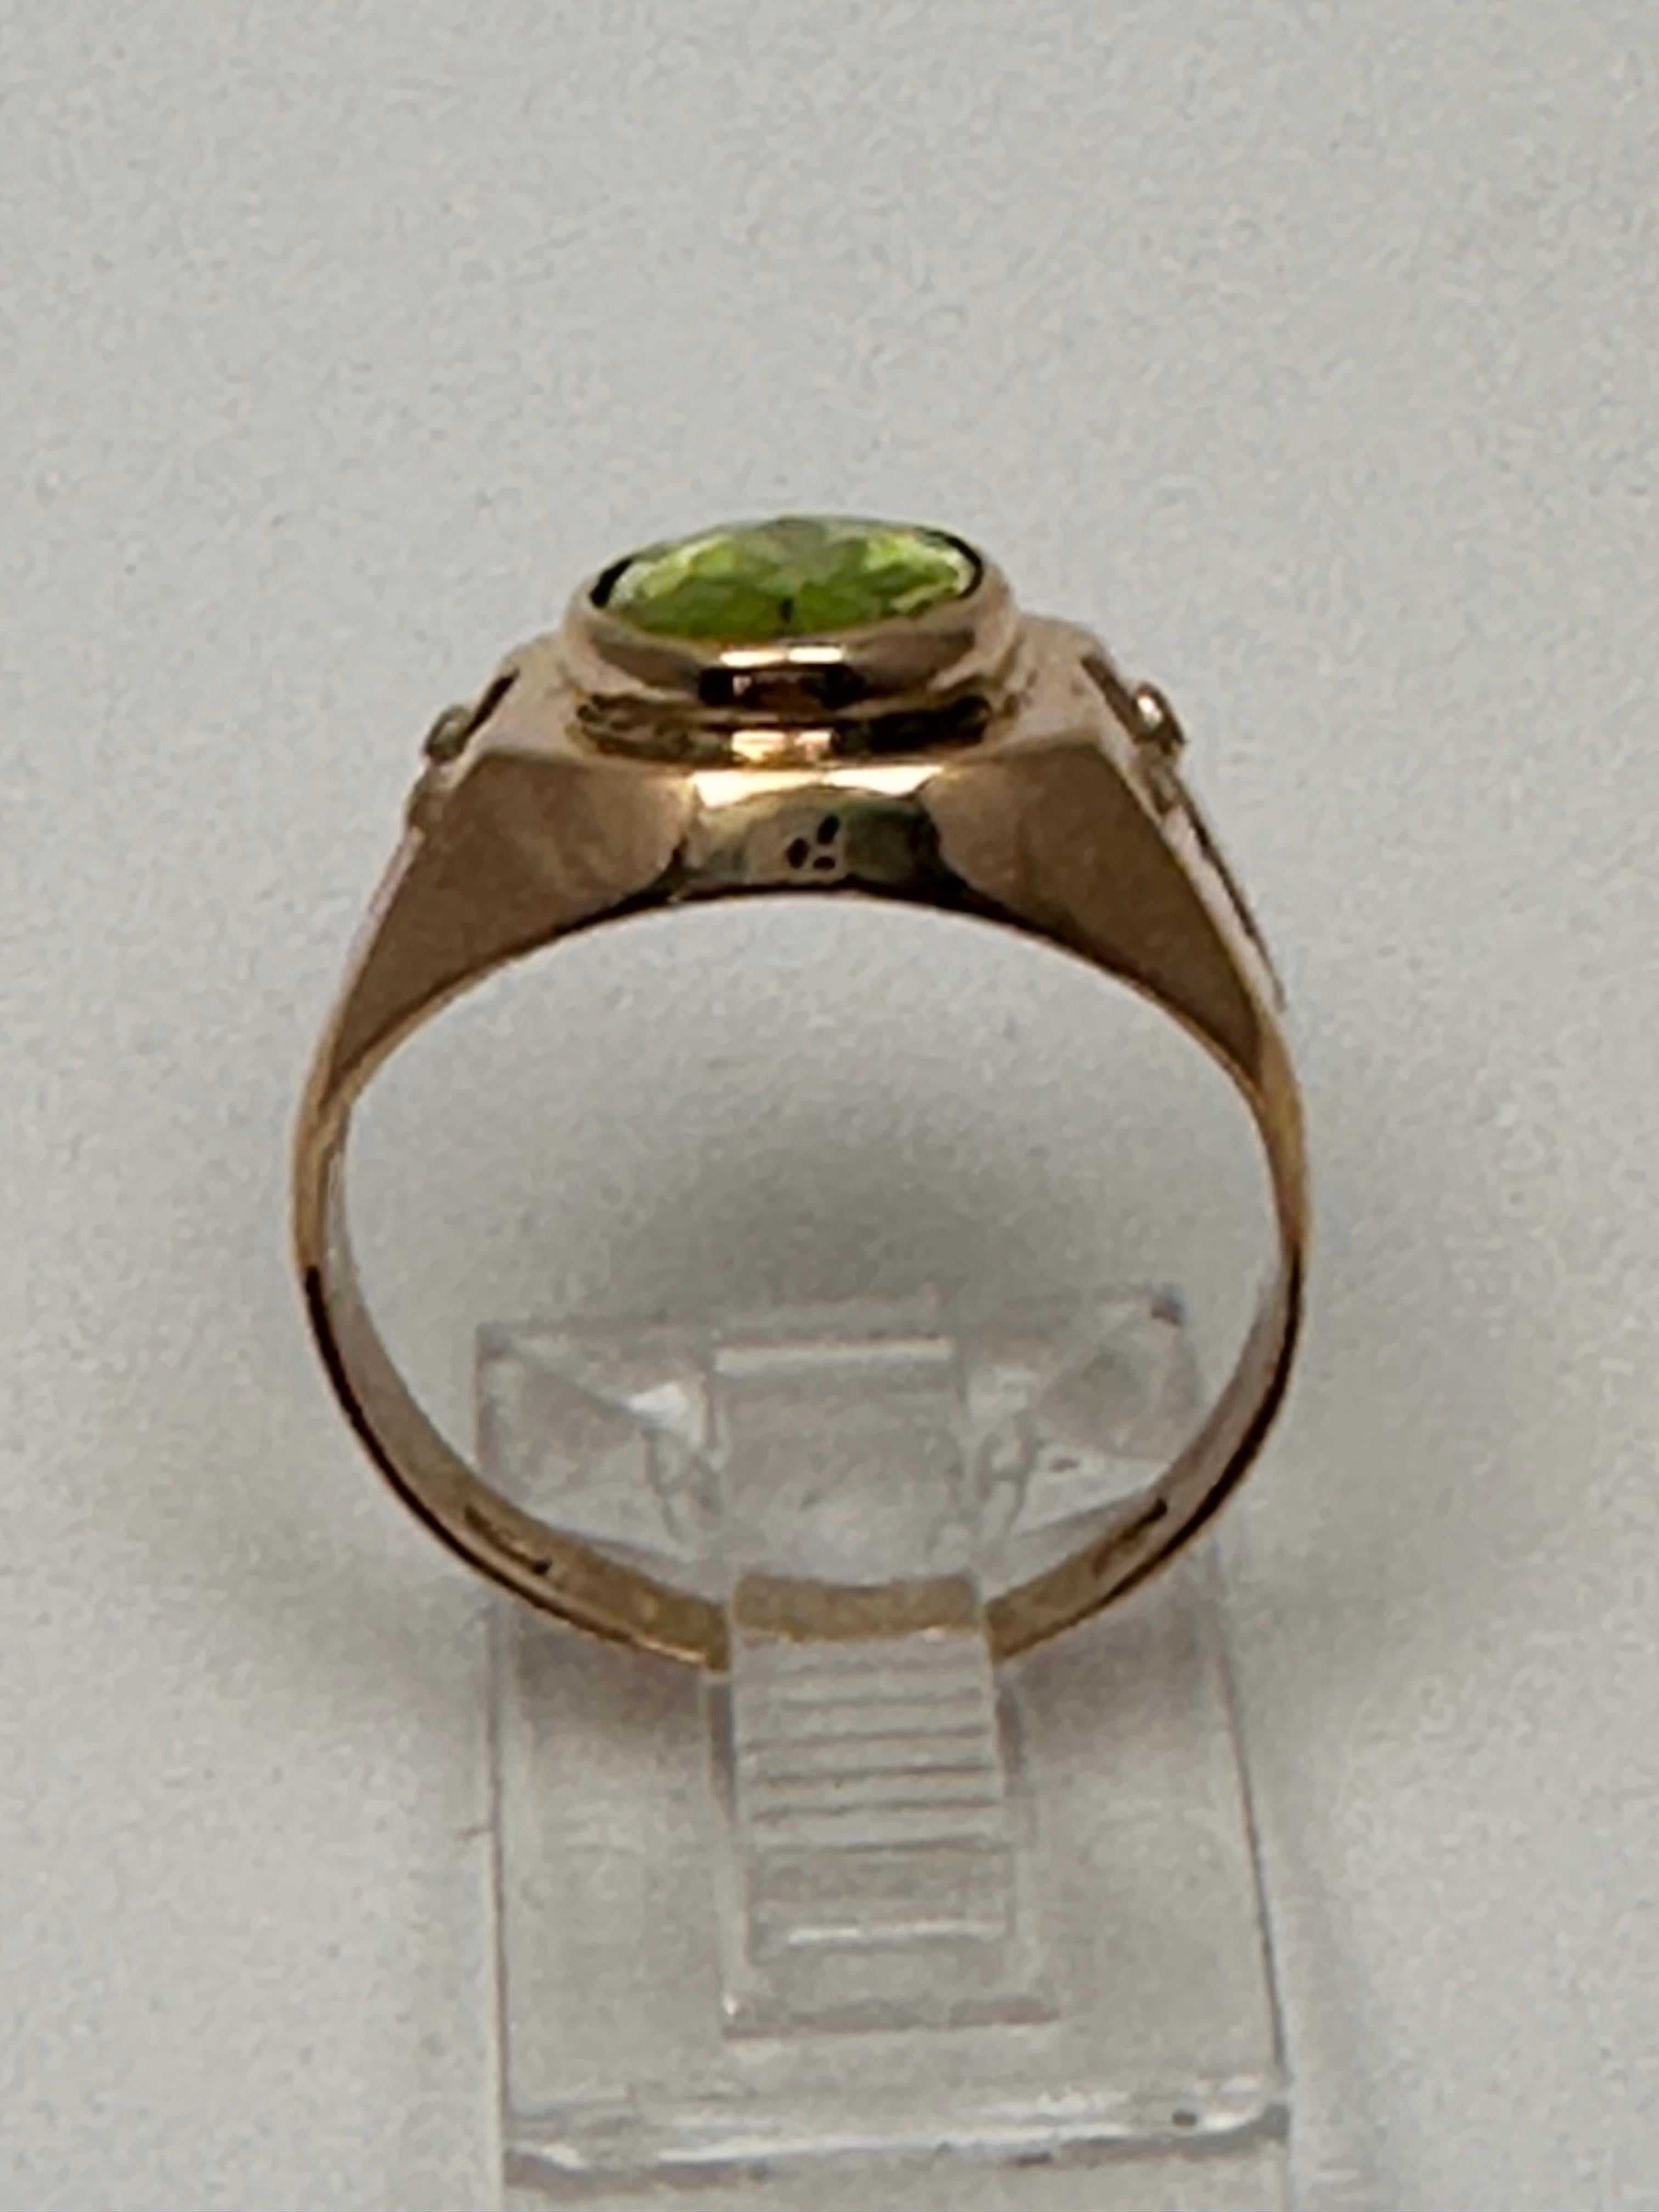 21kt Yellow Gold 8mm x 9mm Oval Peridot Ring Size 5 3/4 For Sale 3